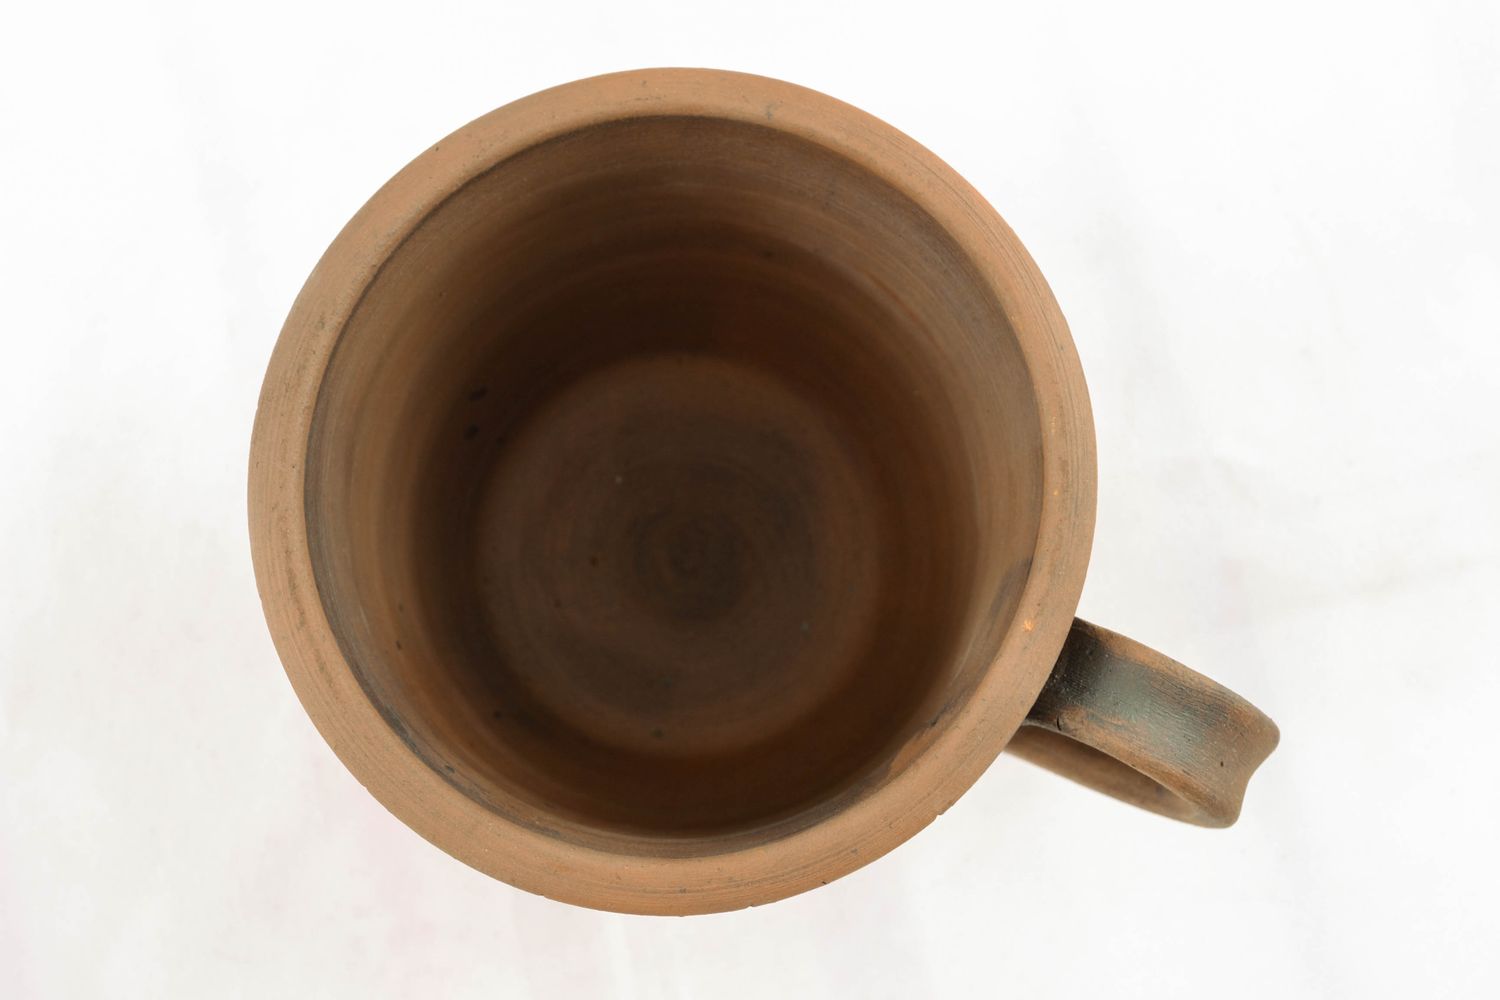 XXL 25 oz clay glazed cup with handle and pattern in a wooden style photo 4